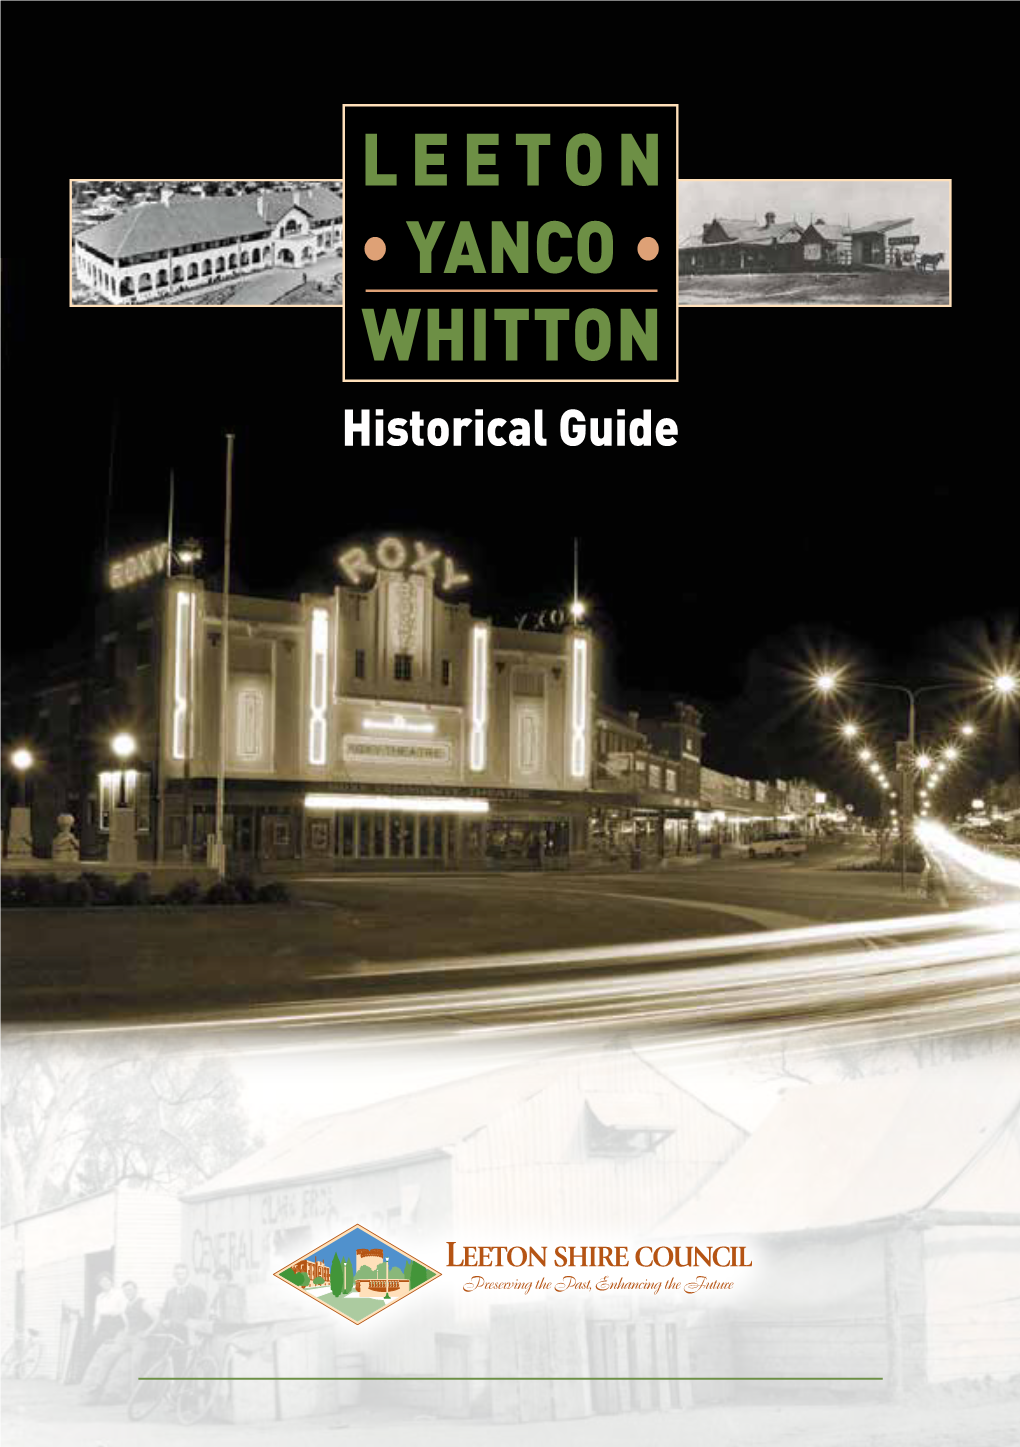 Leeton, Yanco and Whitton Historical Guide